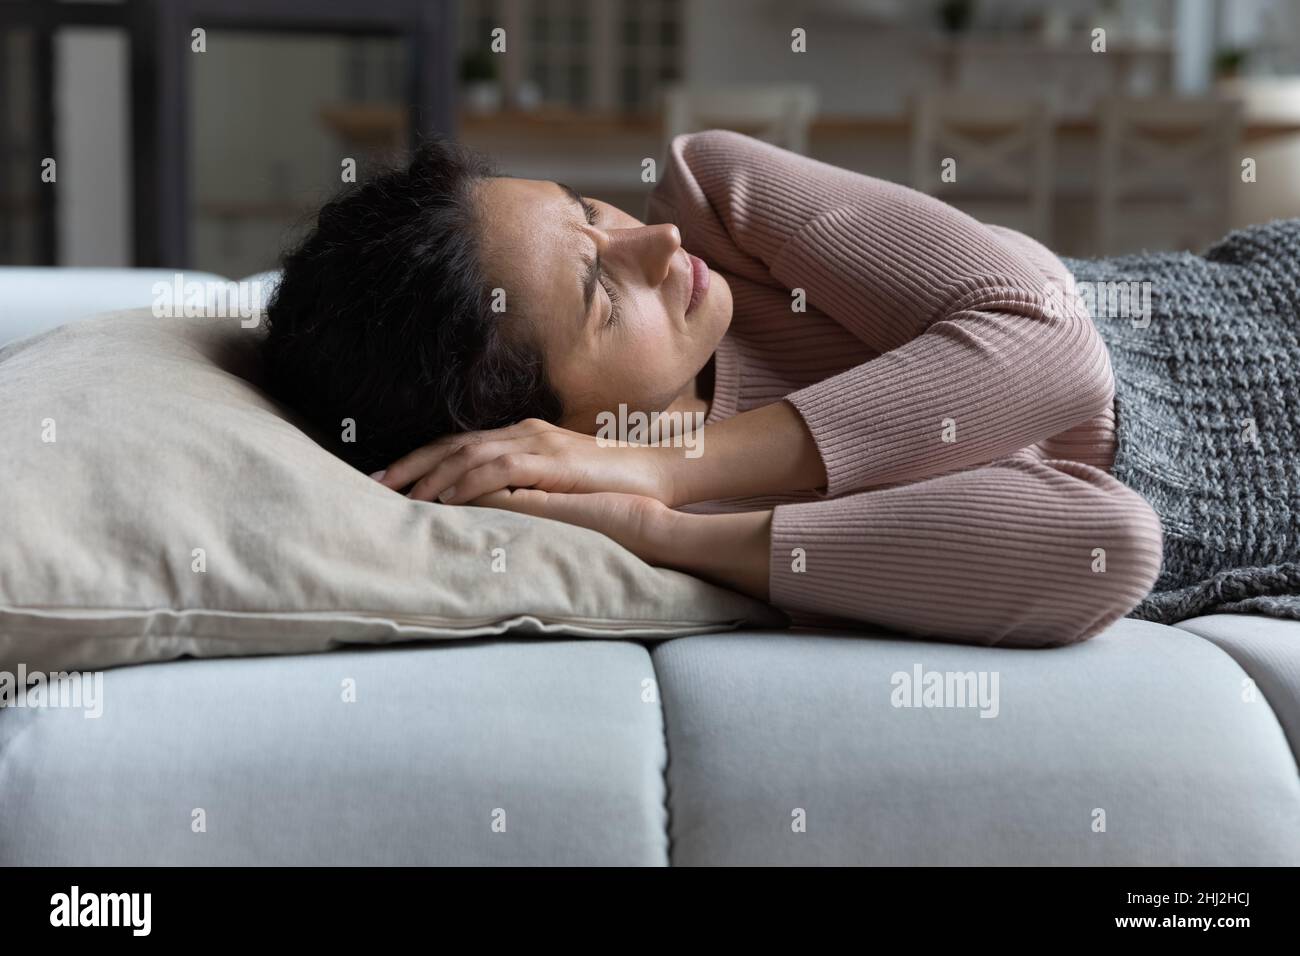 Woman frowning lying on sofa suffer from daytime restless sleep Stock Photo